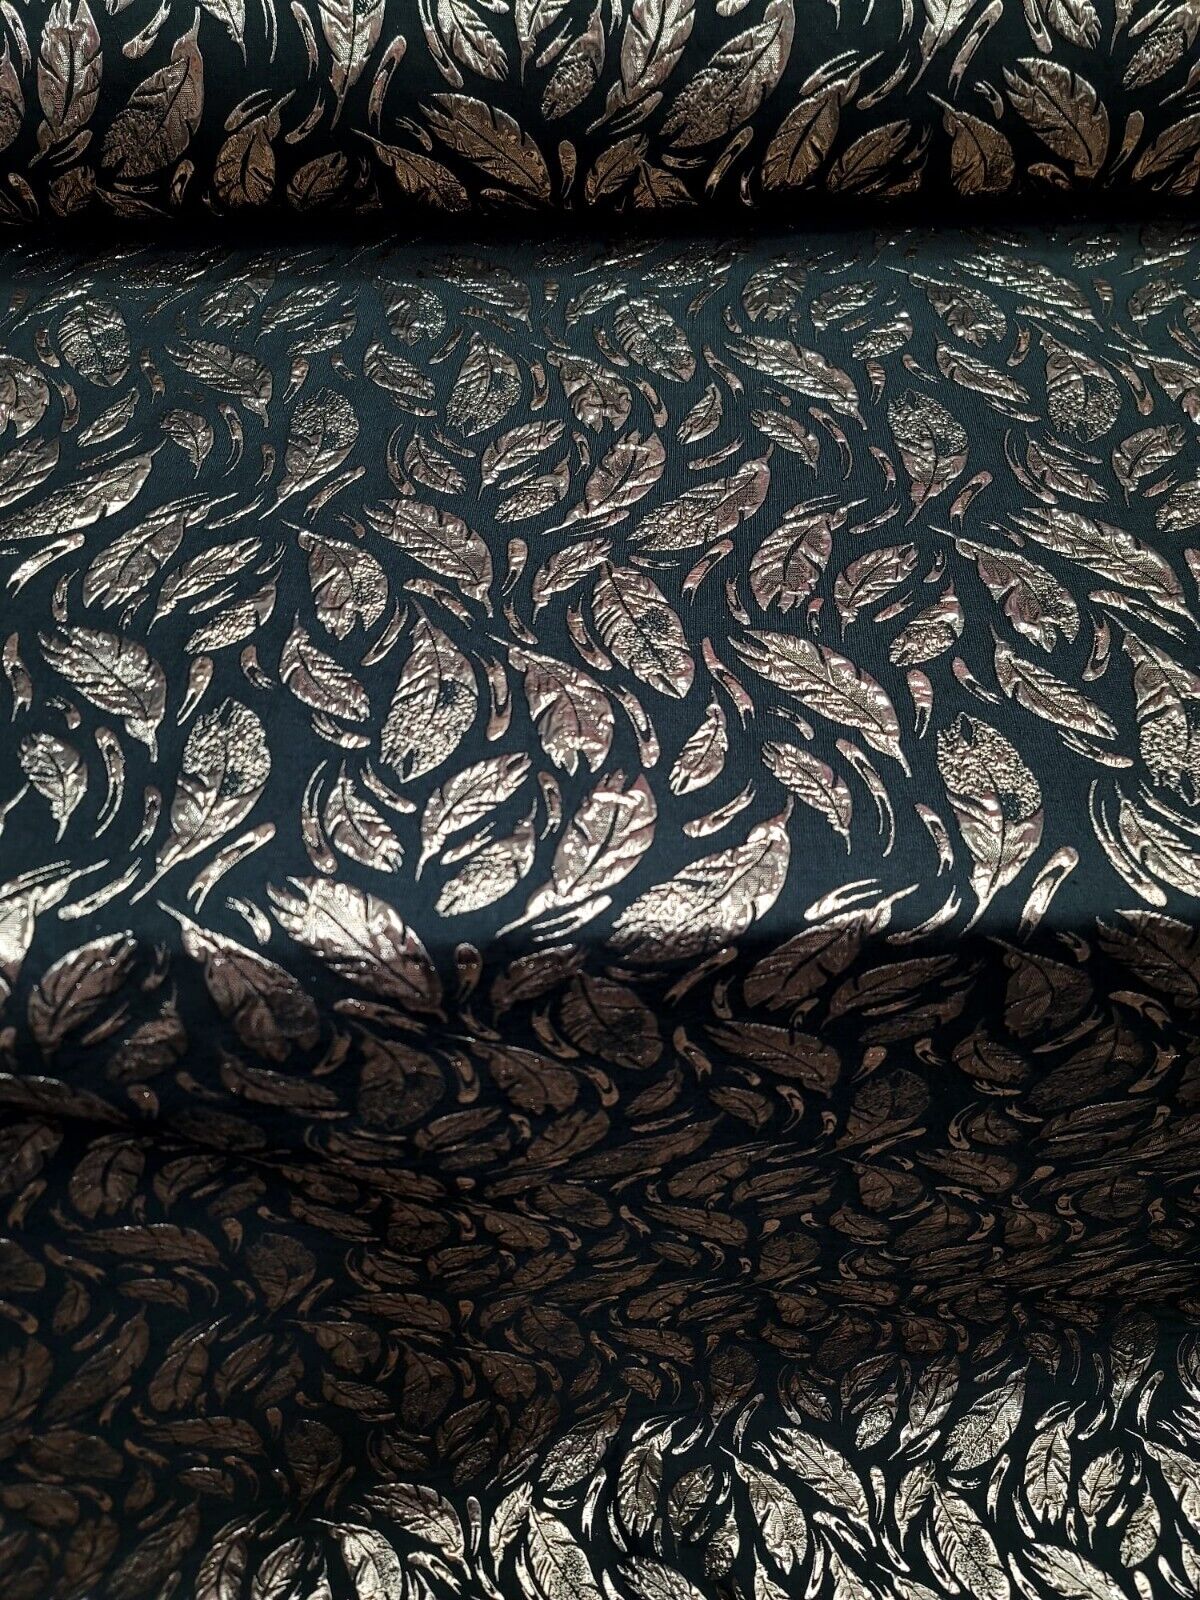 Black Gold Feathers Brocade Fabric - Sold By The Yard - Embossed Dress (60” Width)